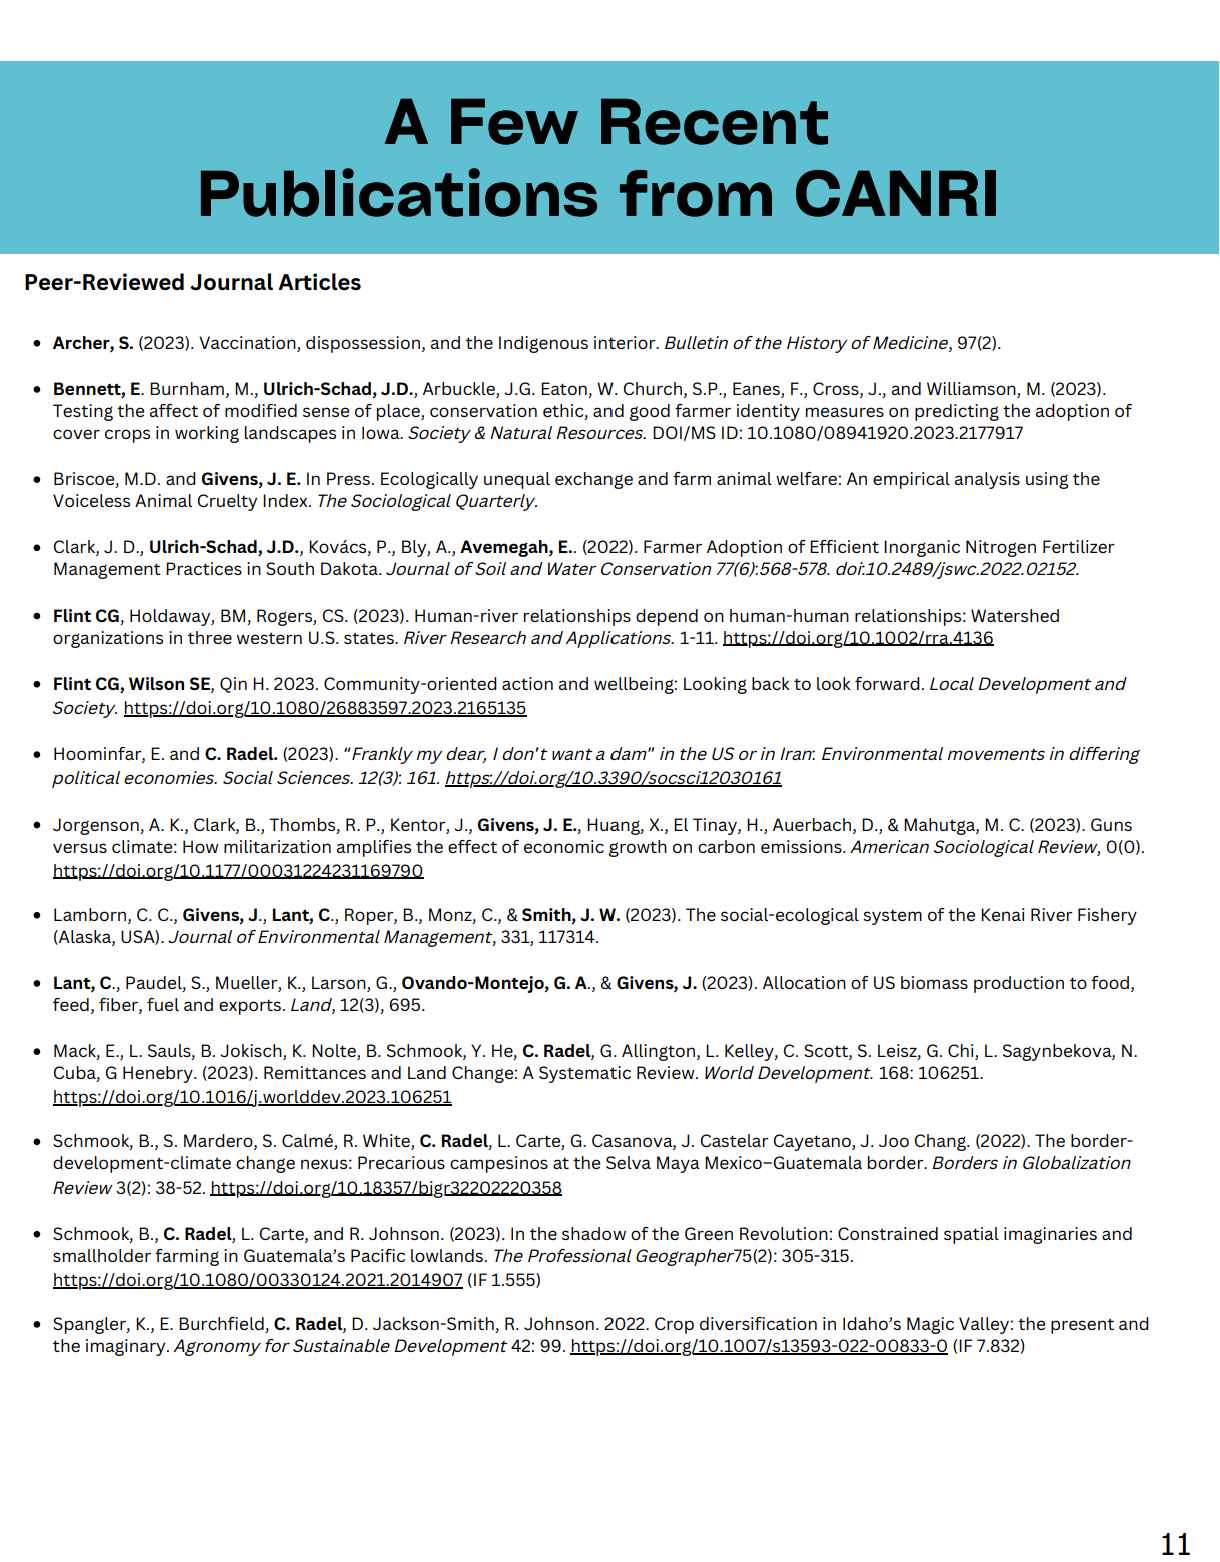 information about new canri publications